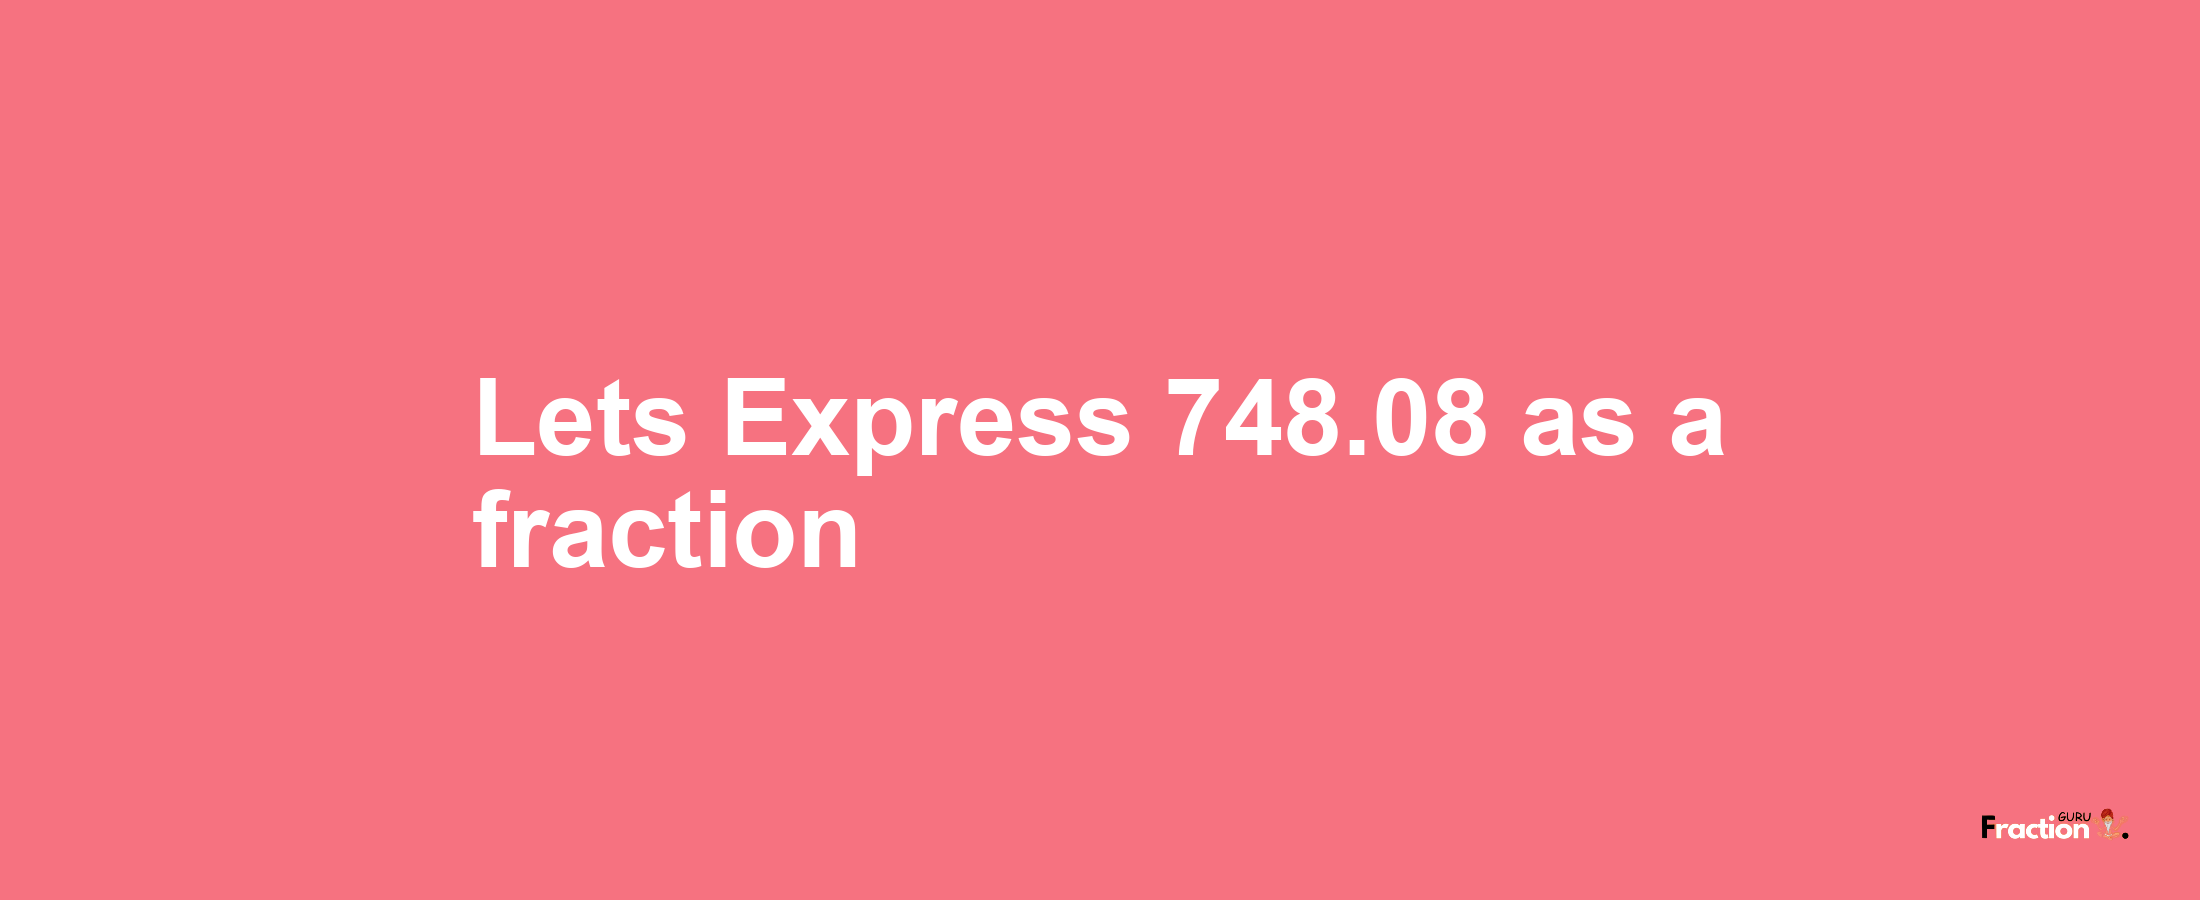 Lets Express 748.08 as afraction